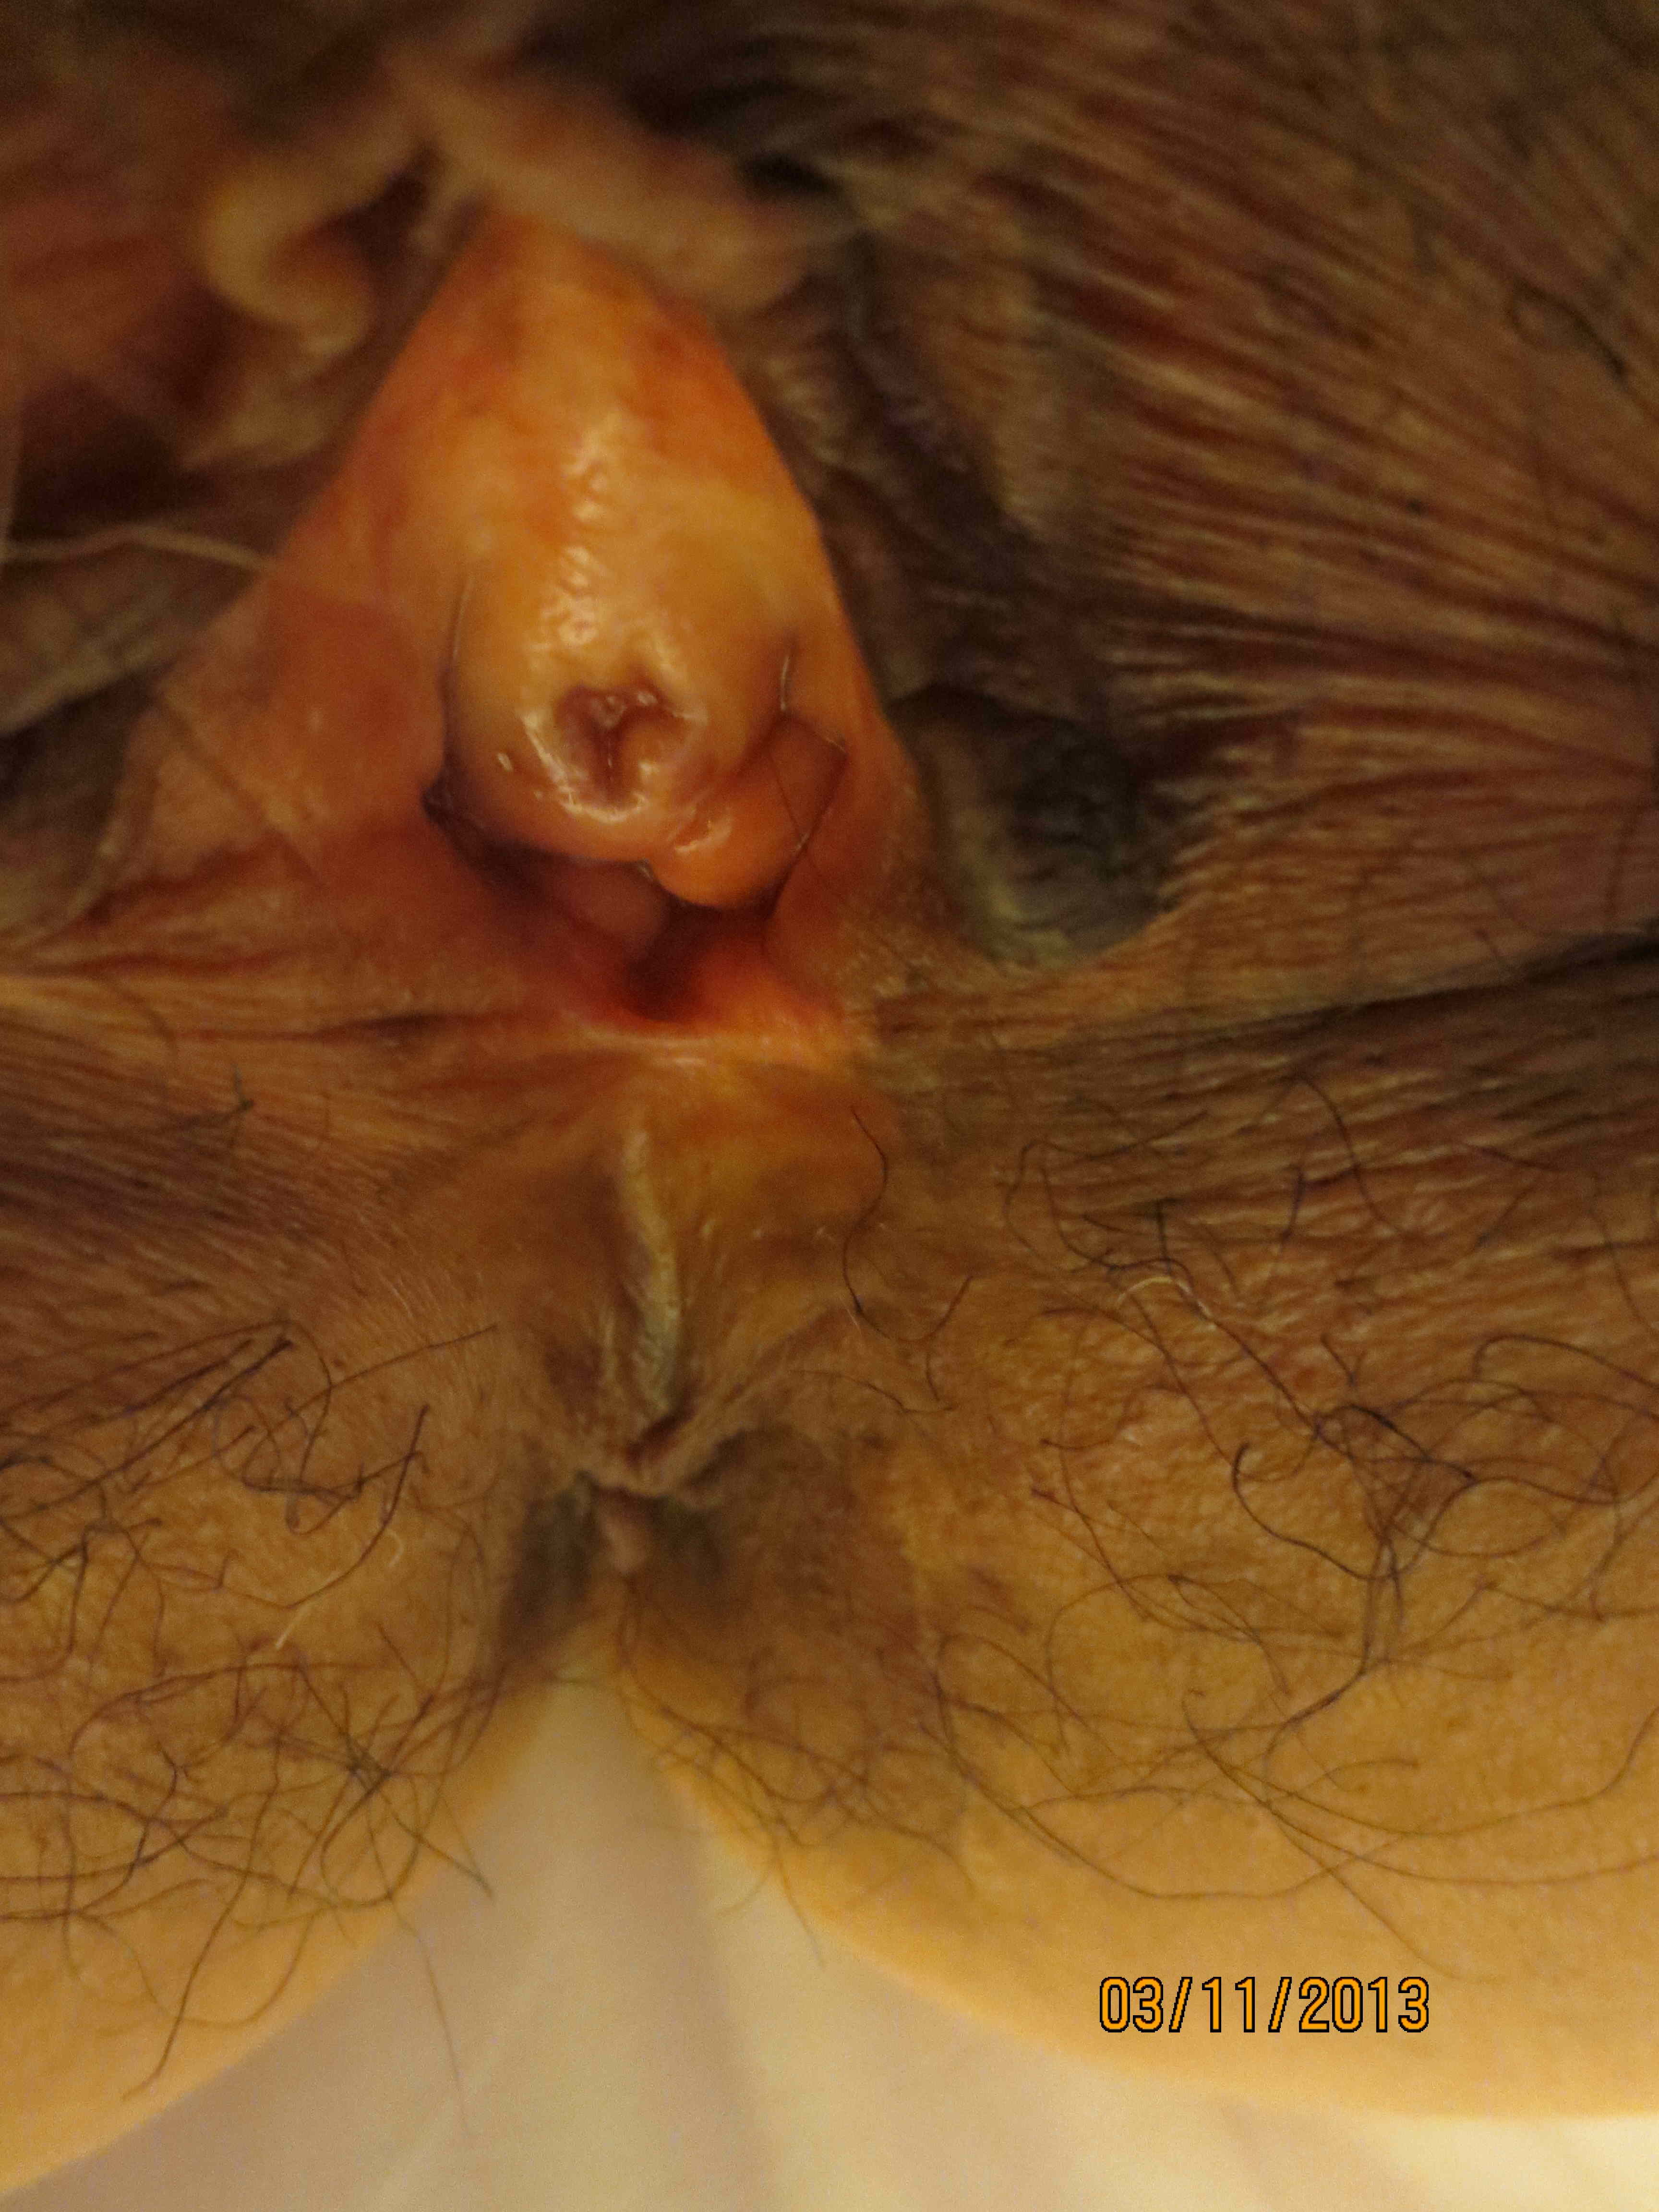 secret monster hole hairy pussy close up on yuvutu homemade amateur porn movies and sex videos 1 picture image